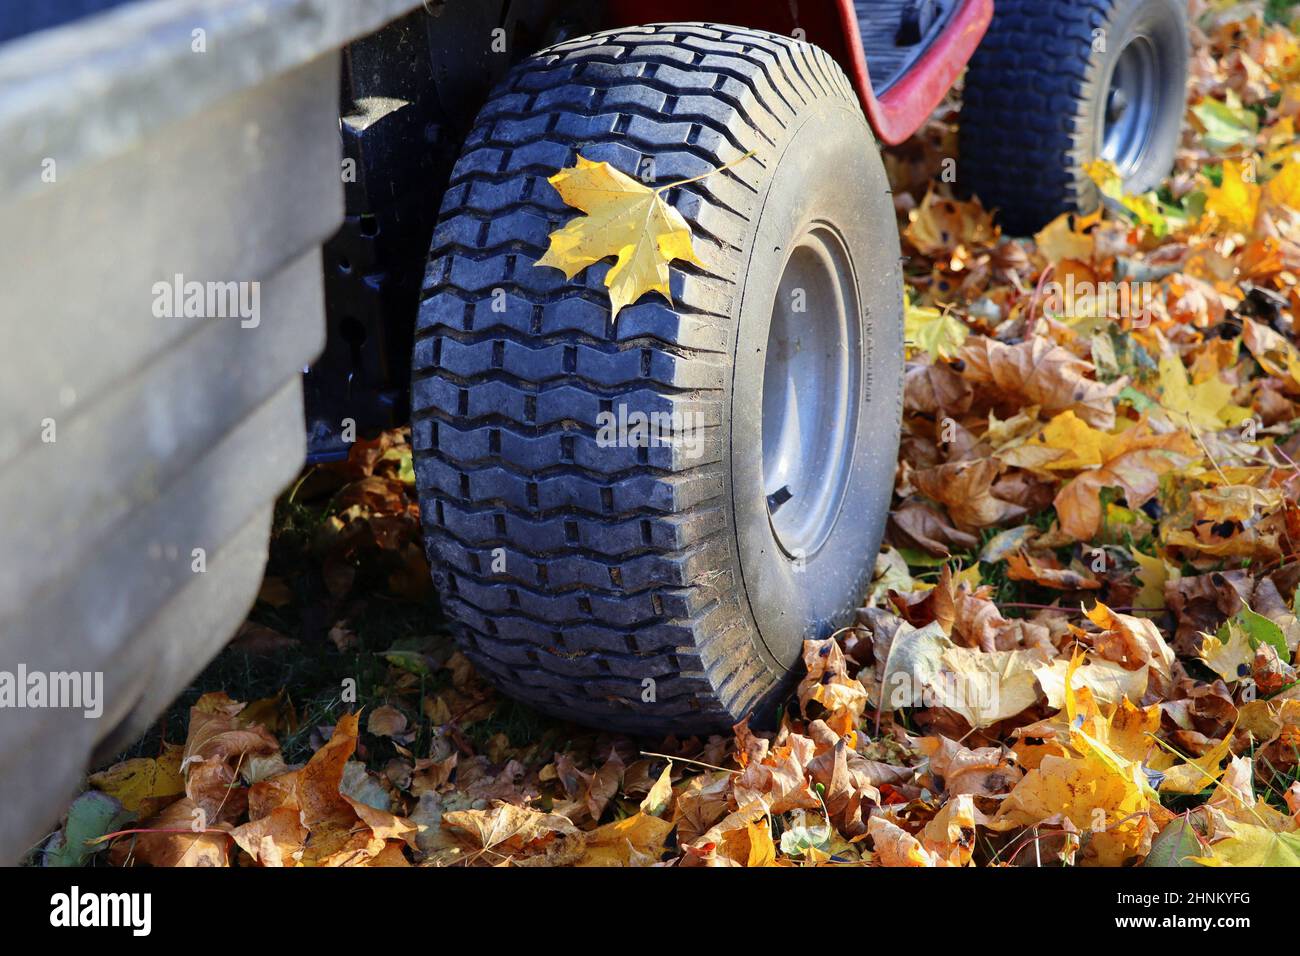 Red riding lawn mower with big container in garden. Concept gardening, mowing, work at outside in autumn Stock Photo